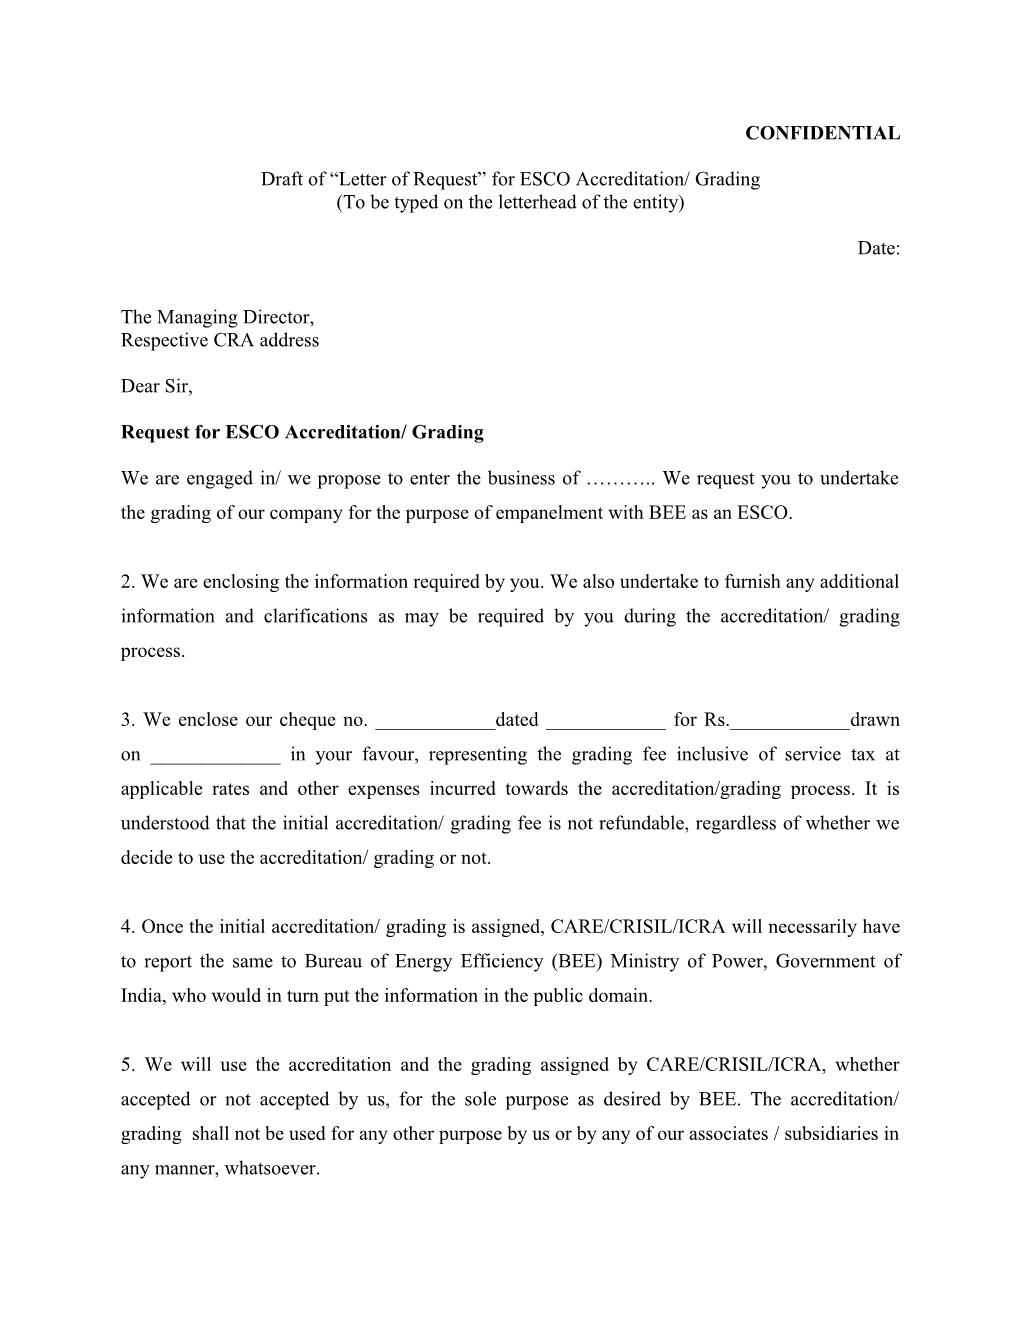 Draft of Letter of Request for ESCO Accreditation/ Grading